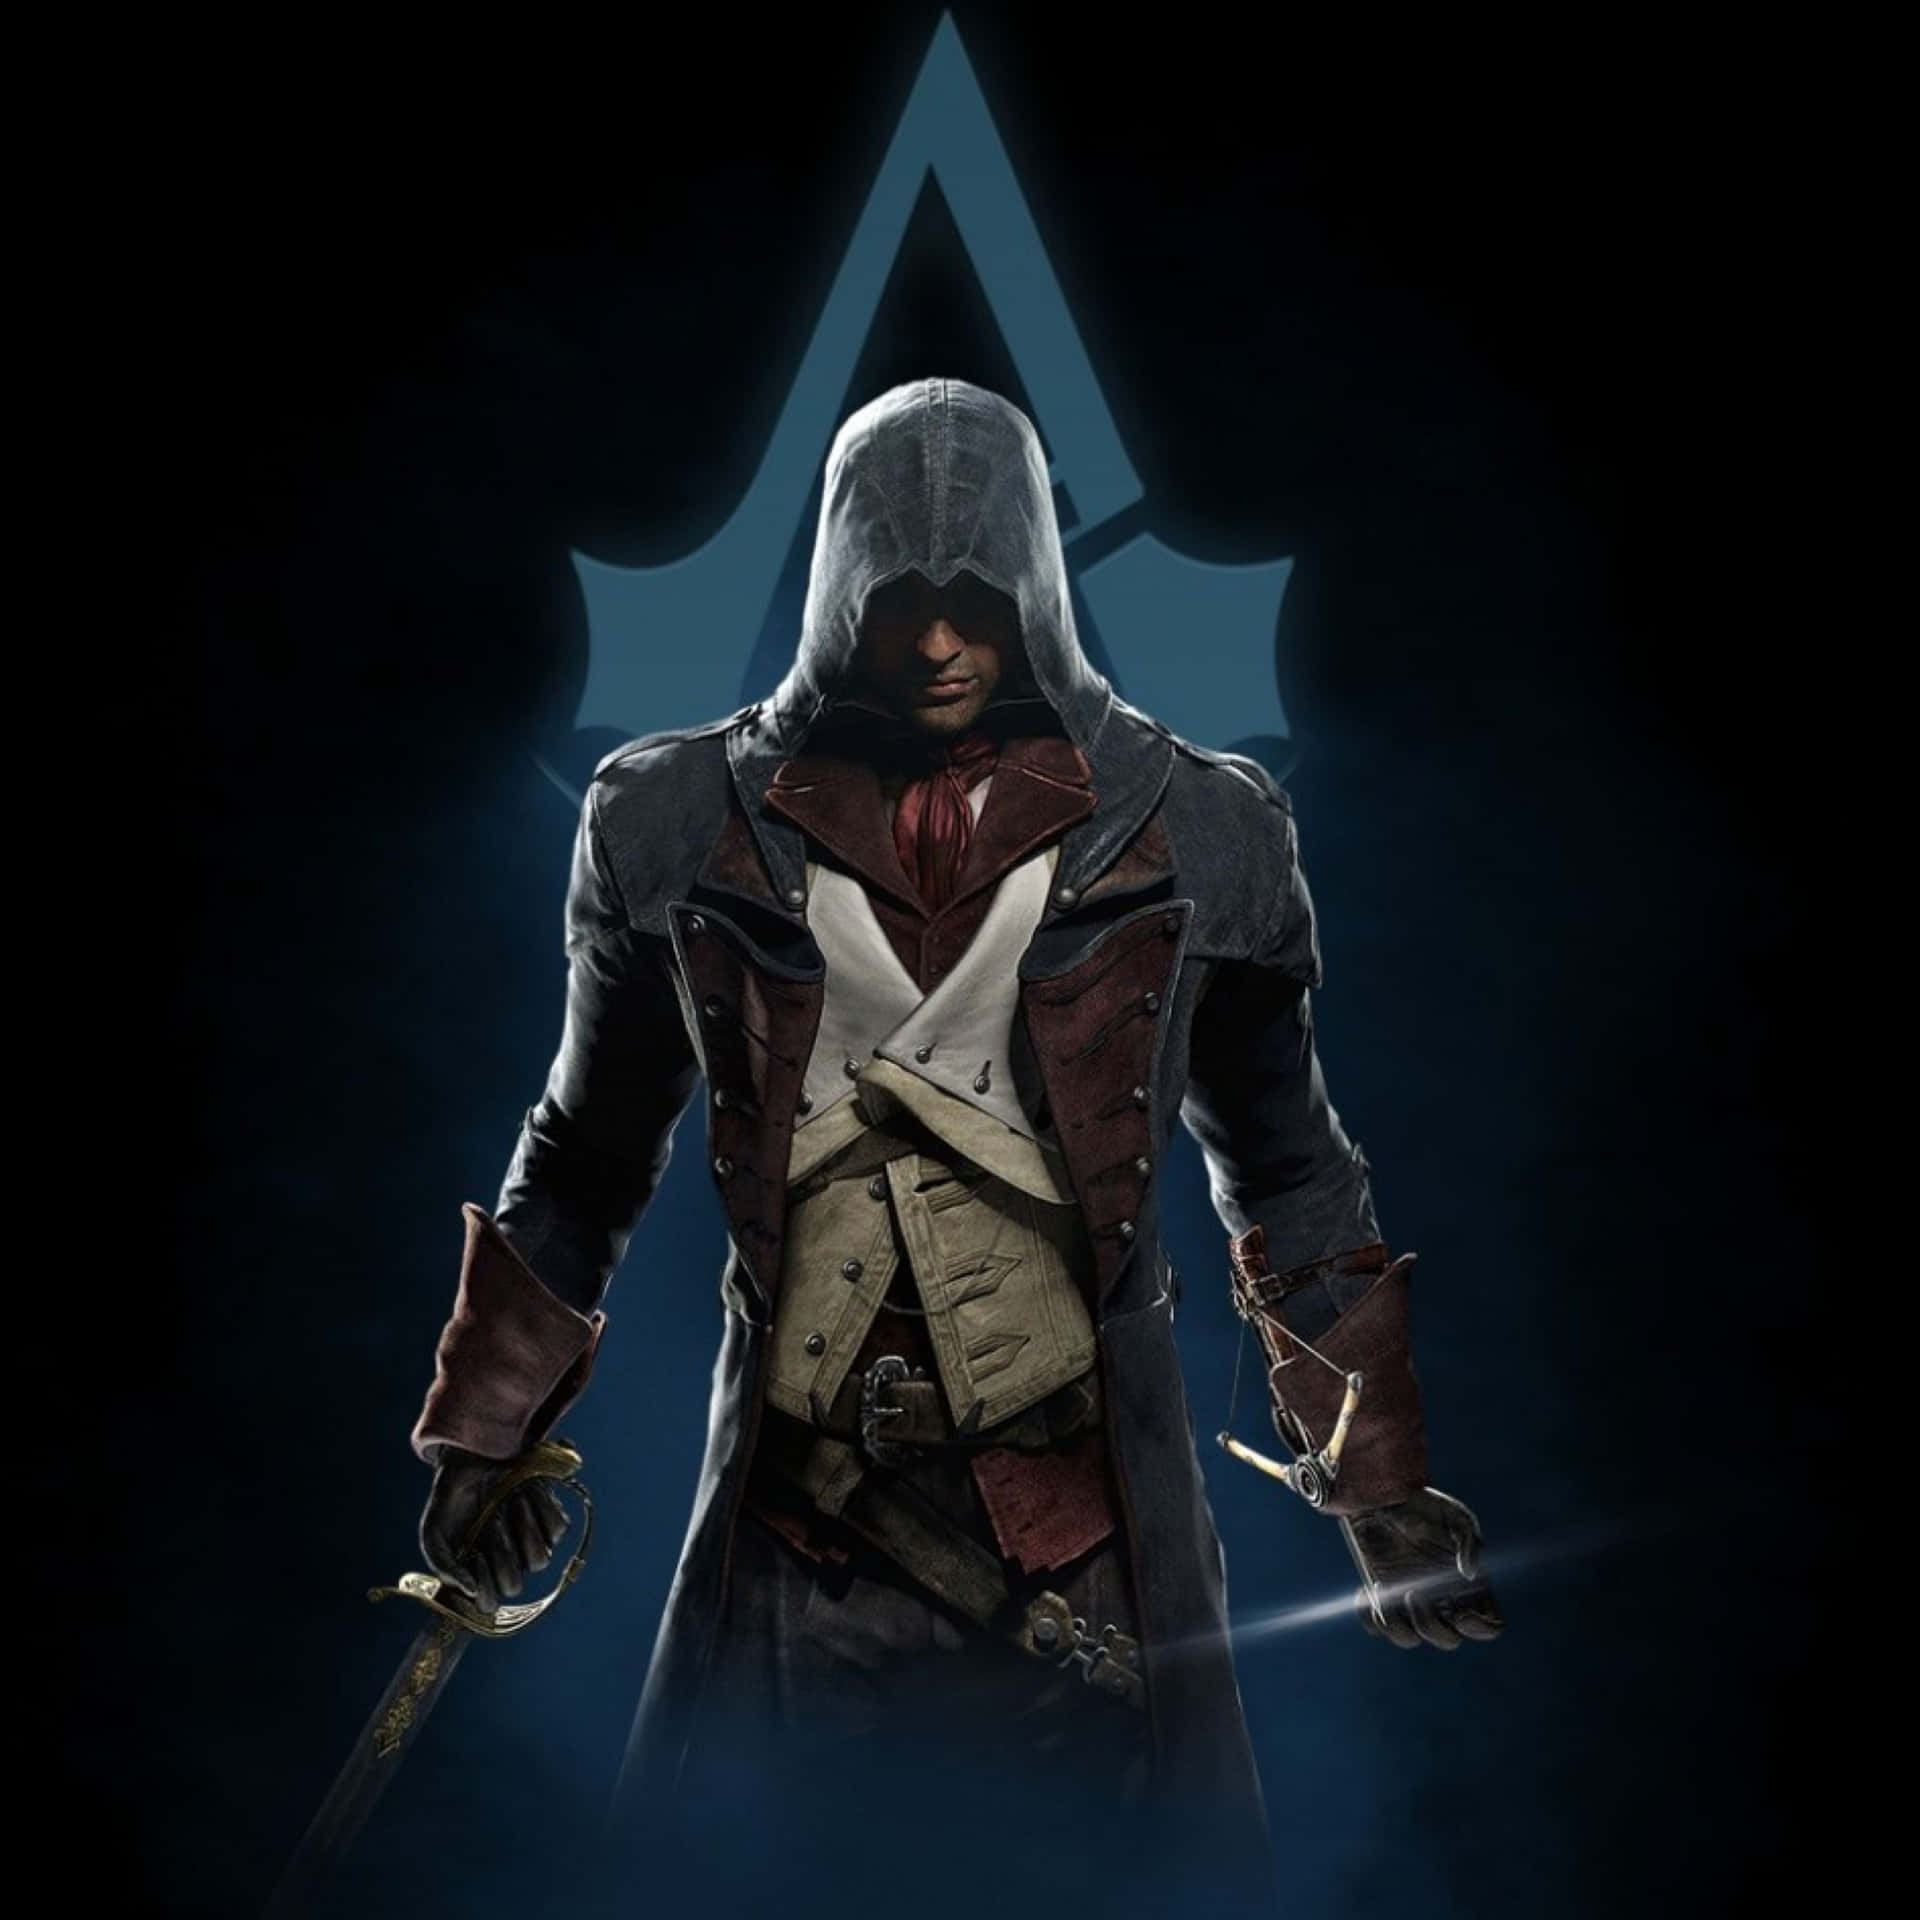 Arno Dorian, Assassin's Creed Unity protagonist in action Wallpaper